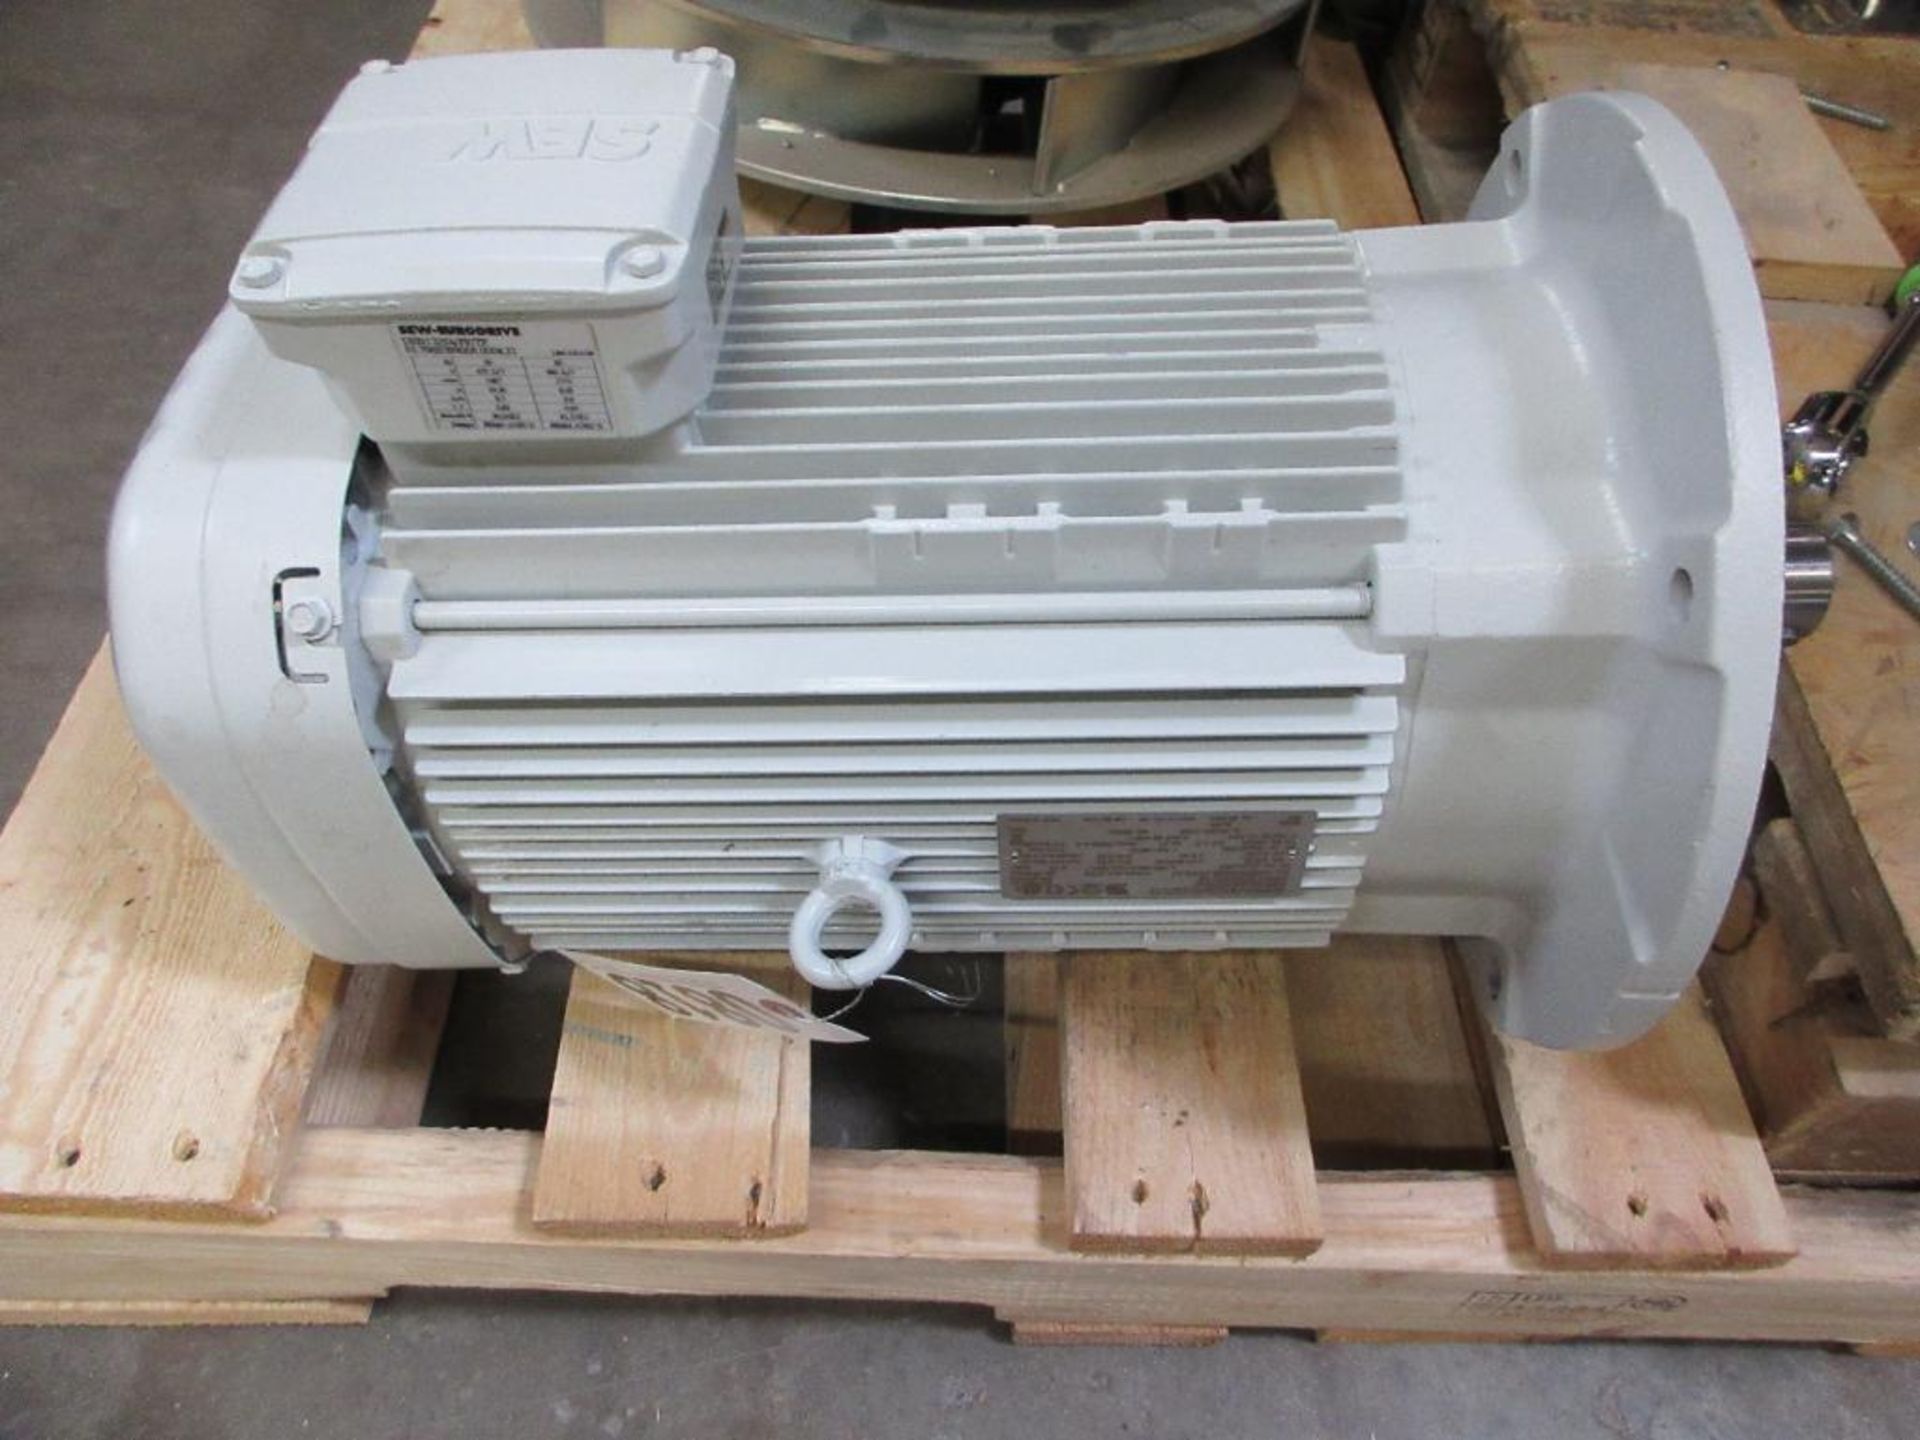 SEW EURODRIVE DRN1325S4/FF/TF 5.5kW 1464 RPM FF265 FRAME ELECTRIC MOTOR (THIS LOT IS FOB CAMARILLO C